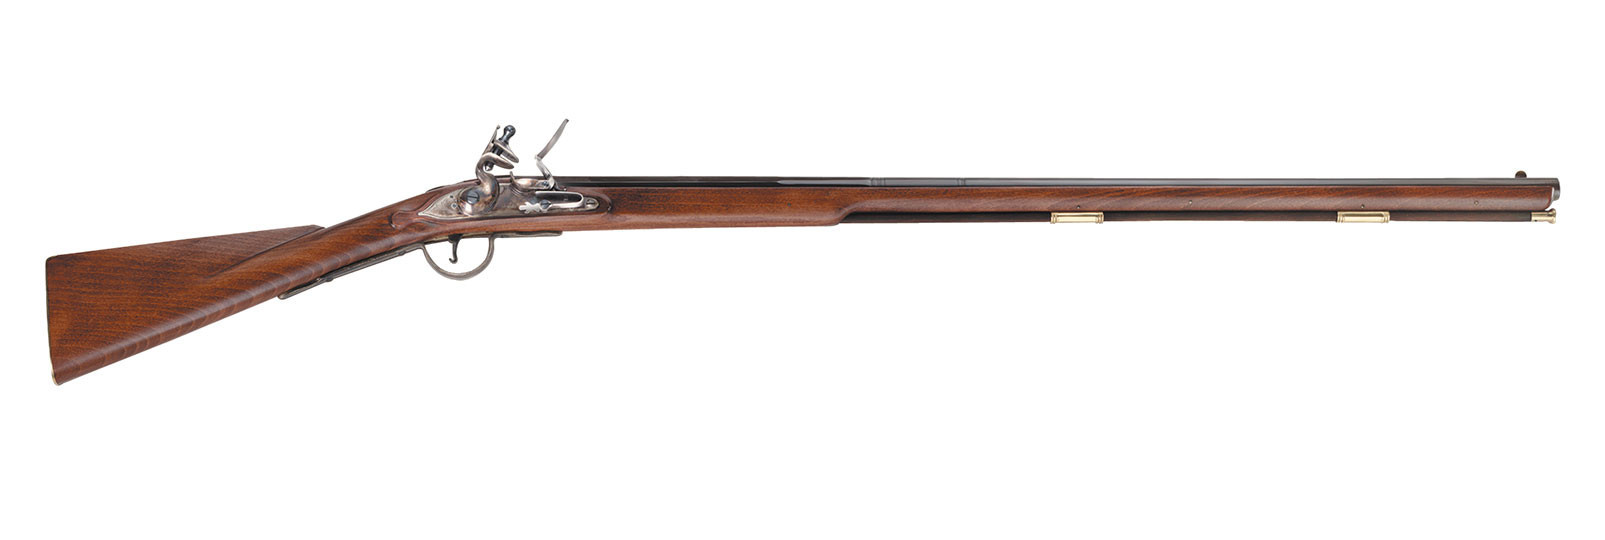 Indian Trade Musket Rifle